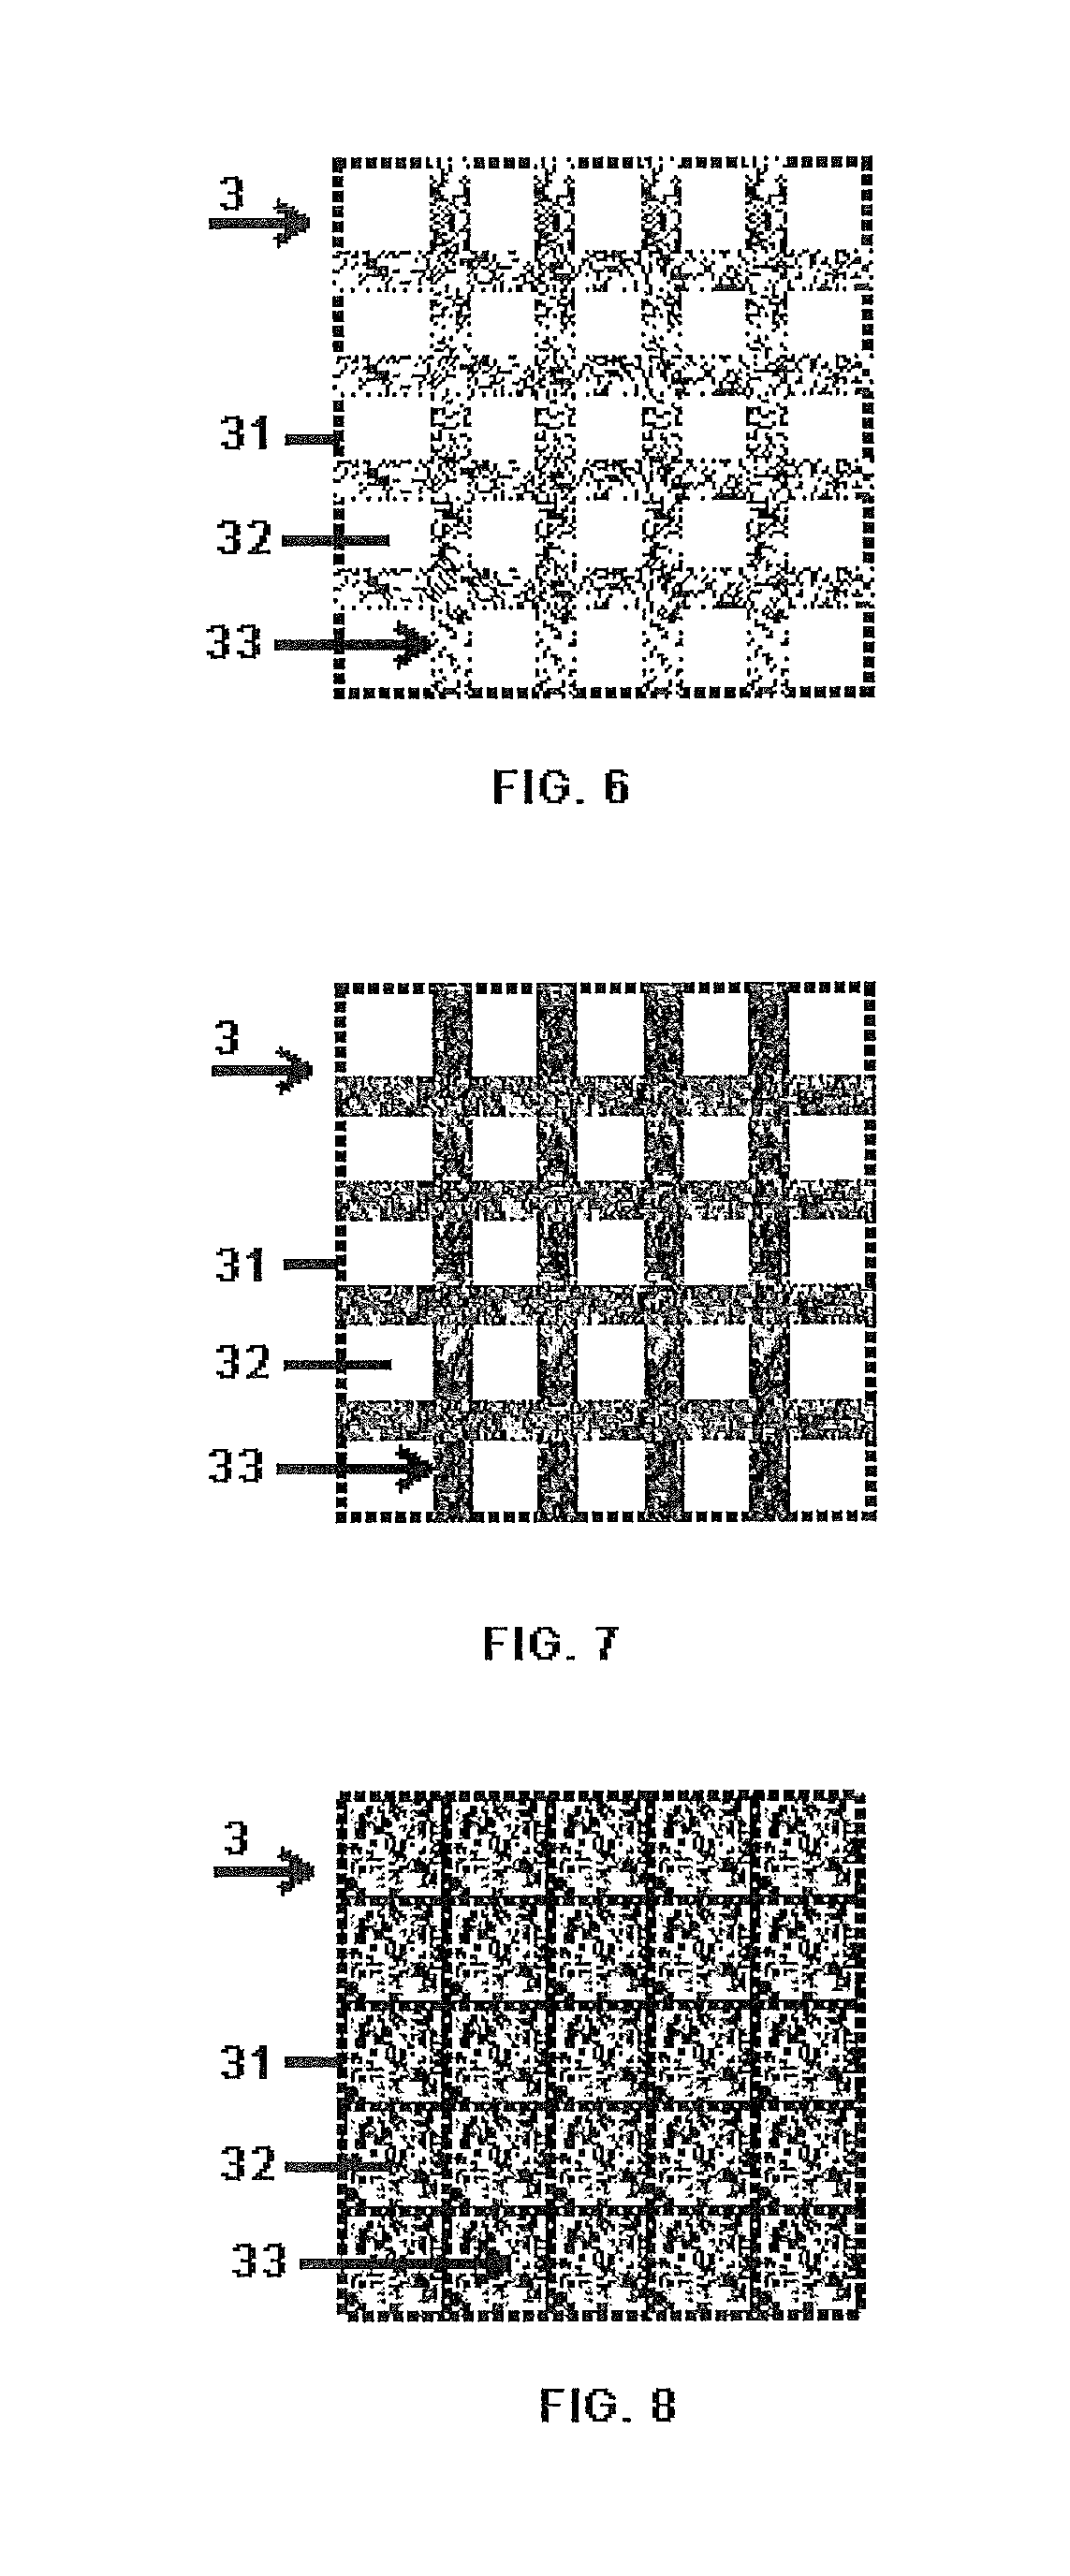 Substrate having porous sheet(s) for treating exhaust gases of combustion engines